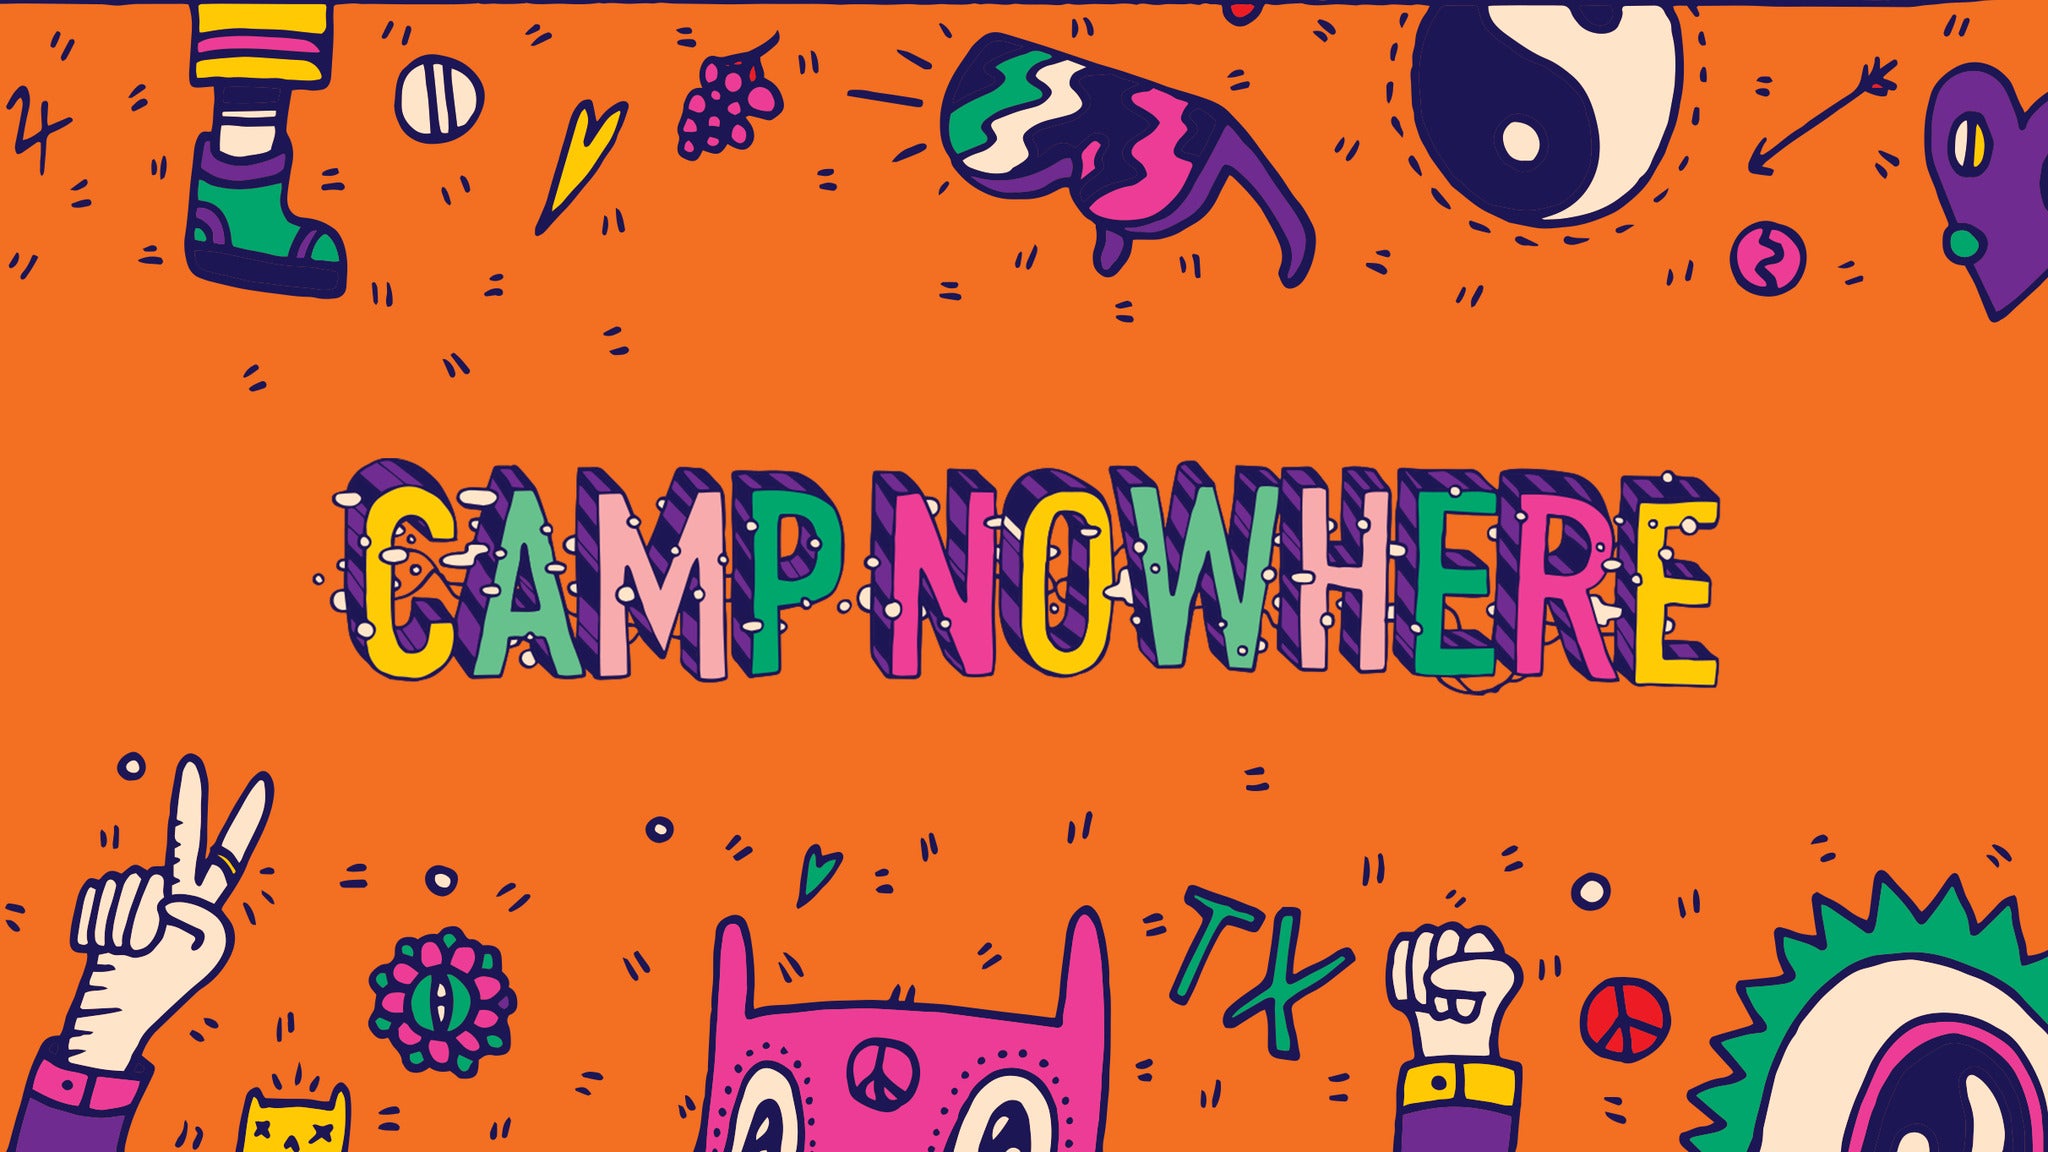 Camp Nowhere 2020 in Dallas promo photo for Official Platinum presale offer code